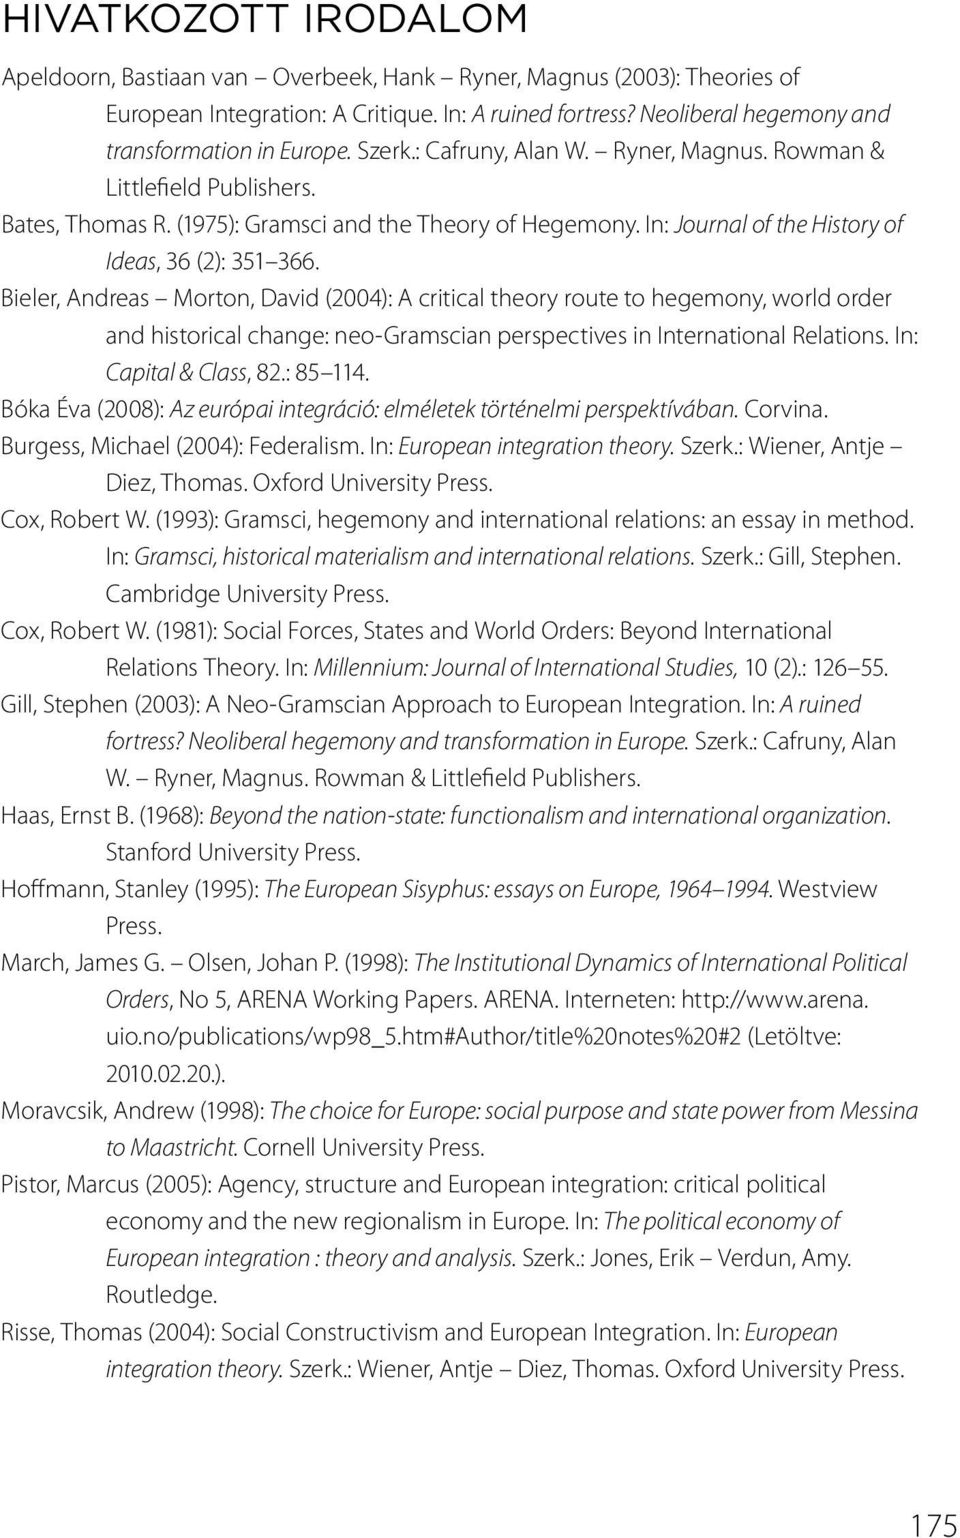 Bieler, Andreas Morton, David (2004): A critical theory route to hegemony, world order and historical change: neo-gramscian perspectives in International Relations. In: Capital & Class, 82.: 85 114.